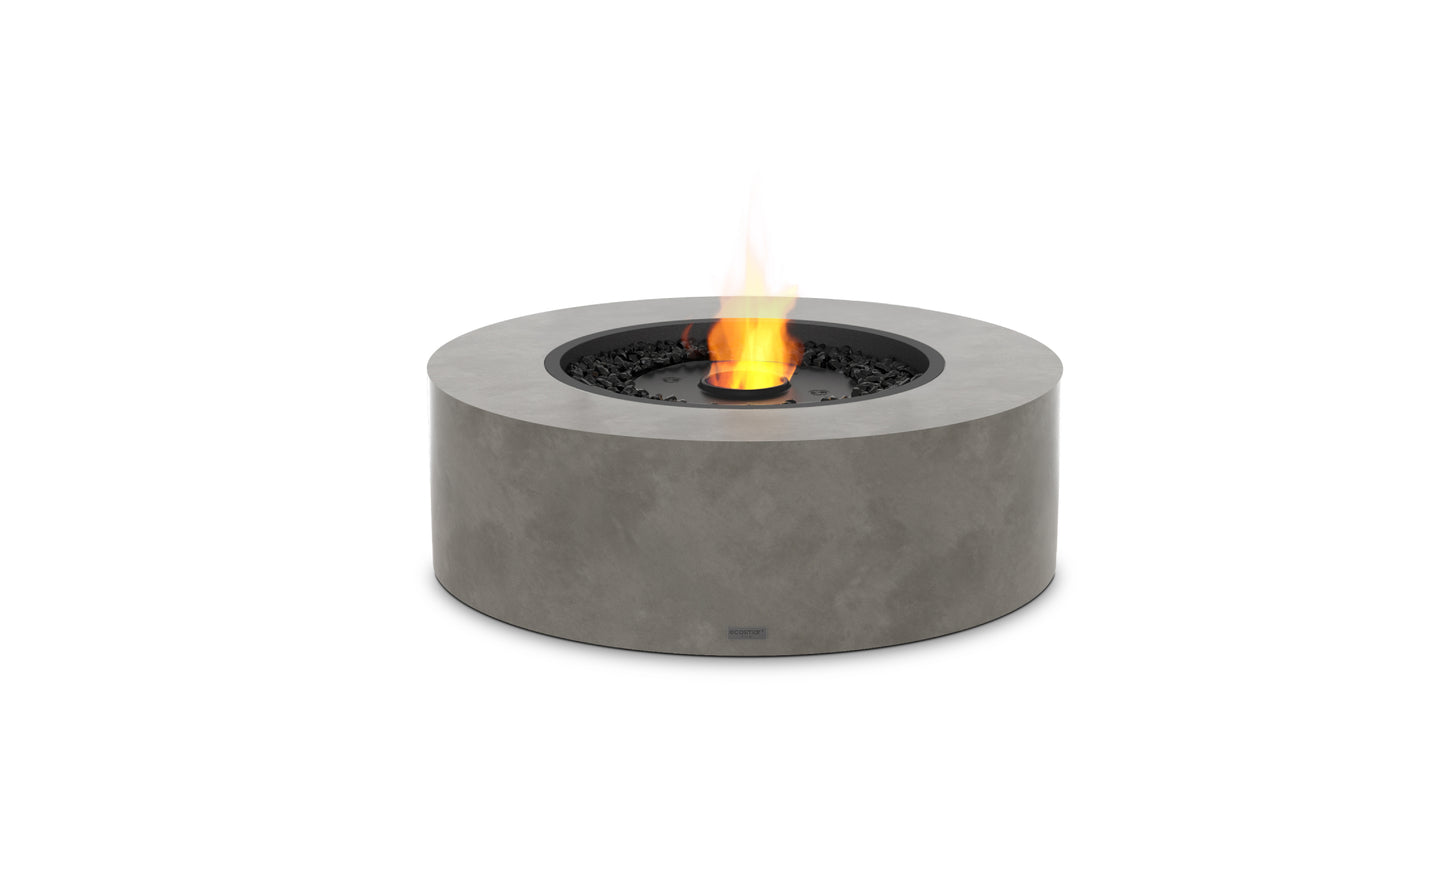 EcoSmart Fire Ark 40 Fire Pit Table with Bioethanol Sustainable Fuel - PadioLiving - EcoSmart Fire Ark 40 Fire Pit Table with Bioethanol Sustainable Fuel - Fire Pit - PadioLiving